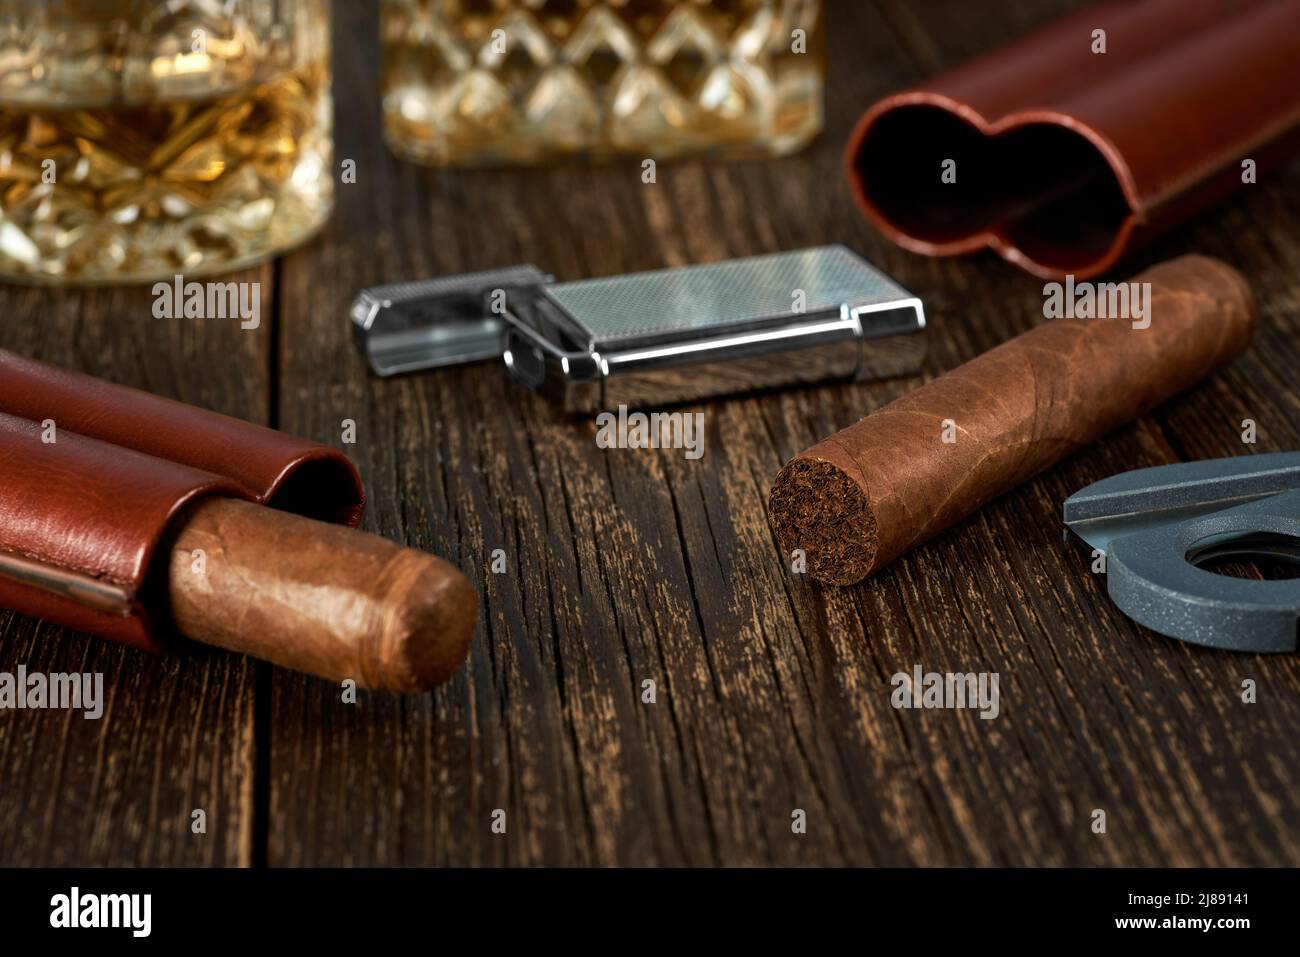 Two Cuban cigars and lighter in a leather case on an old brown table top. Glass of whiskey on a blurred background. Stock Photo